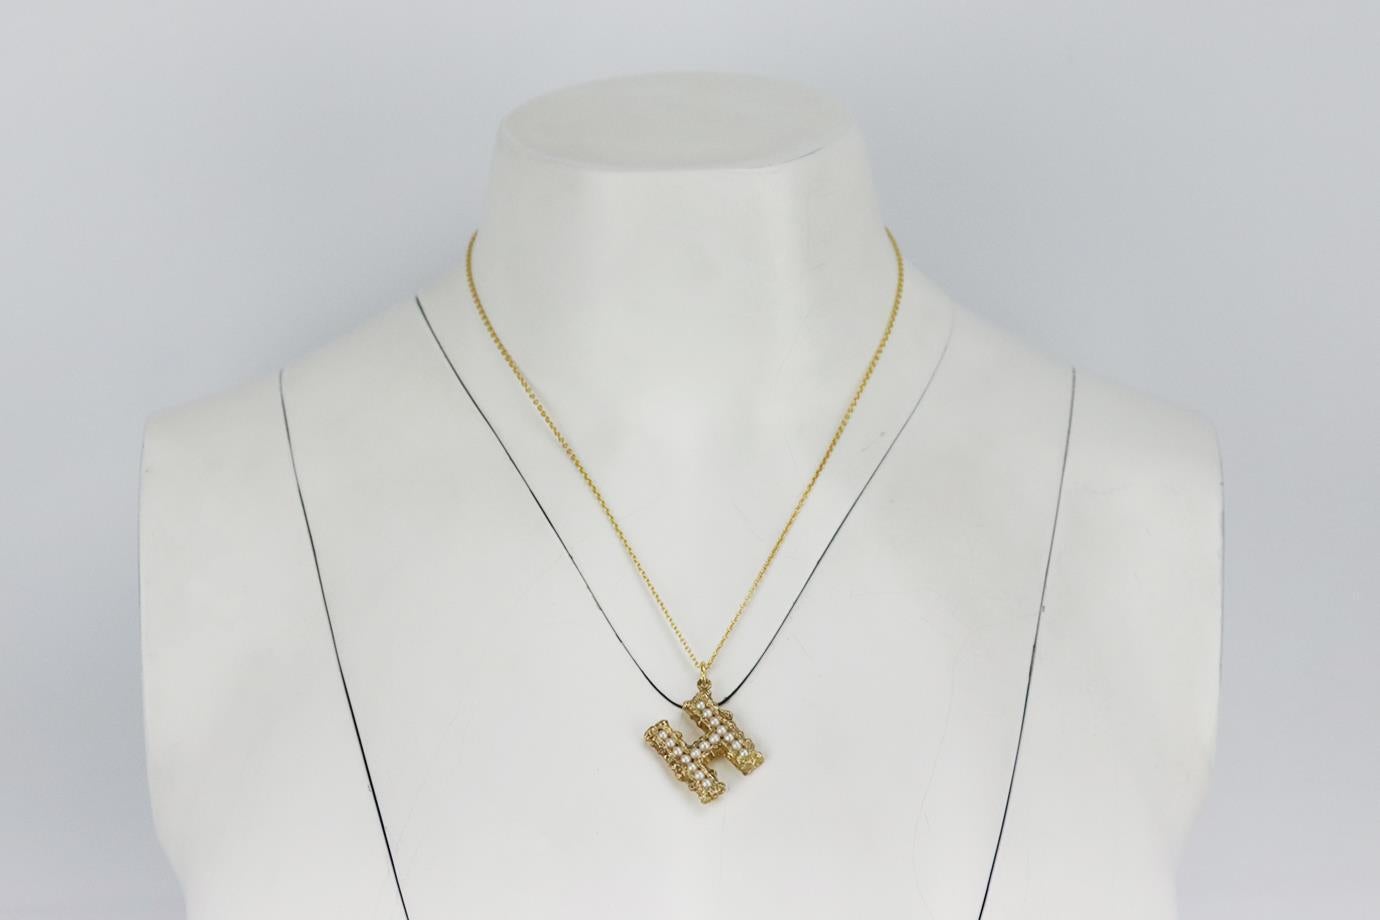 pacharee initial necklace